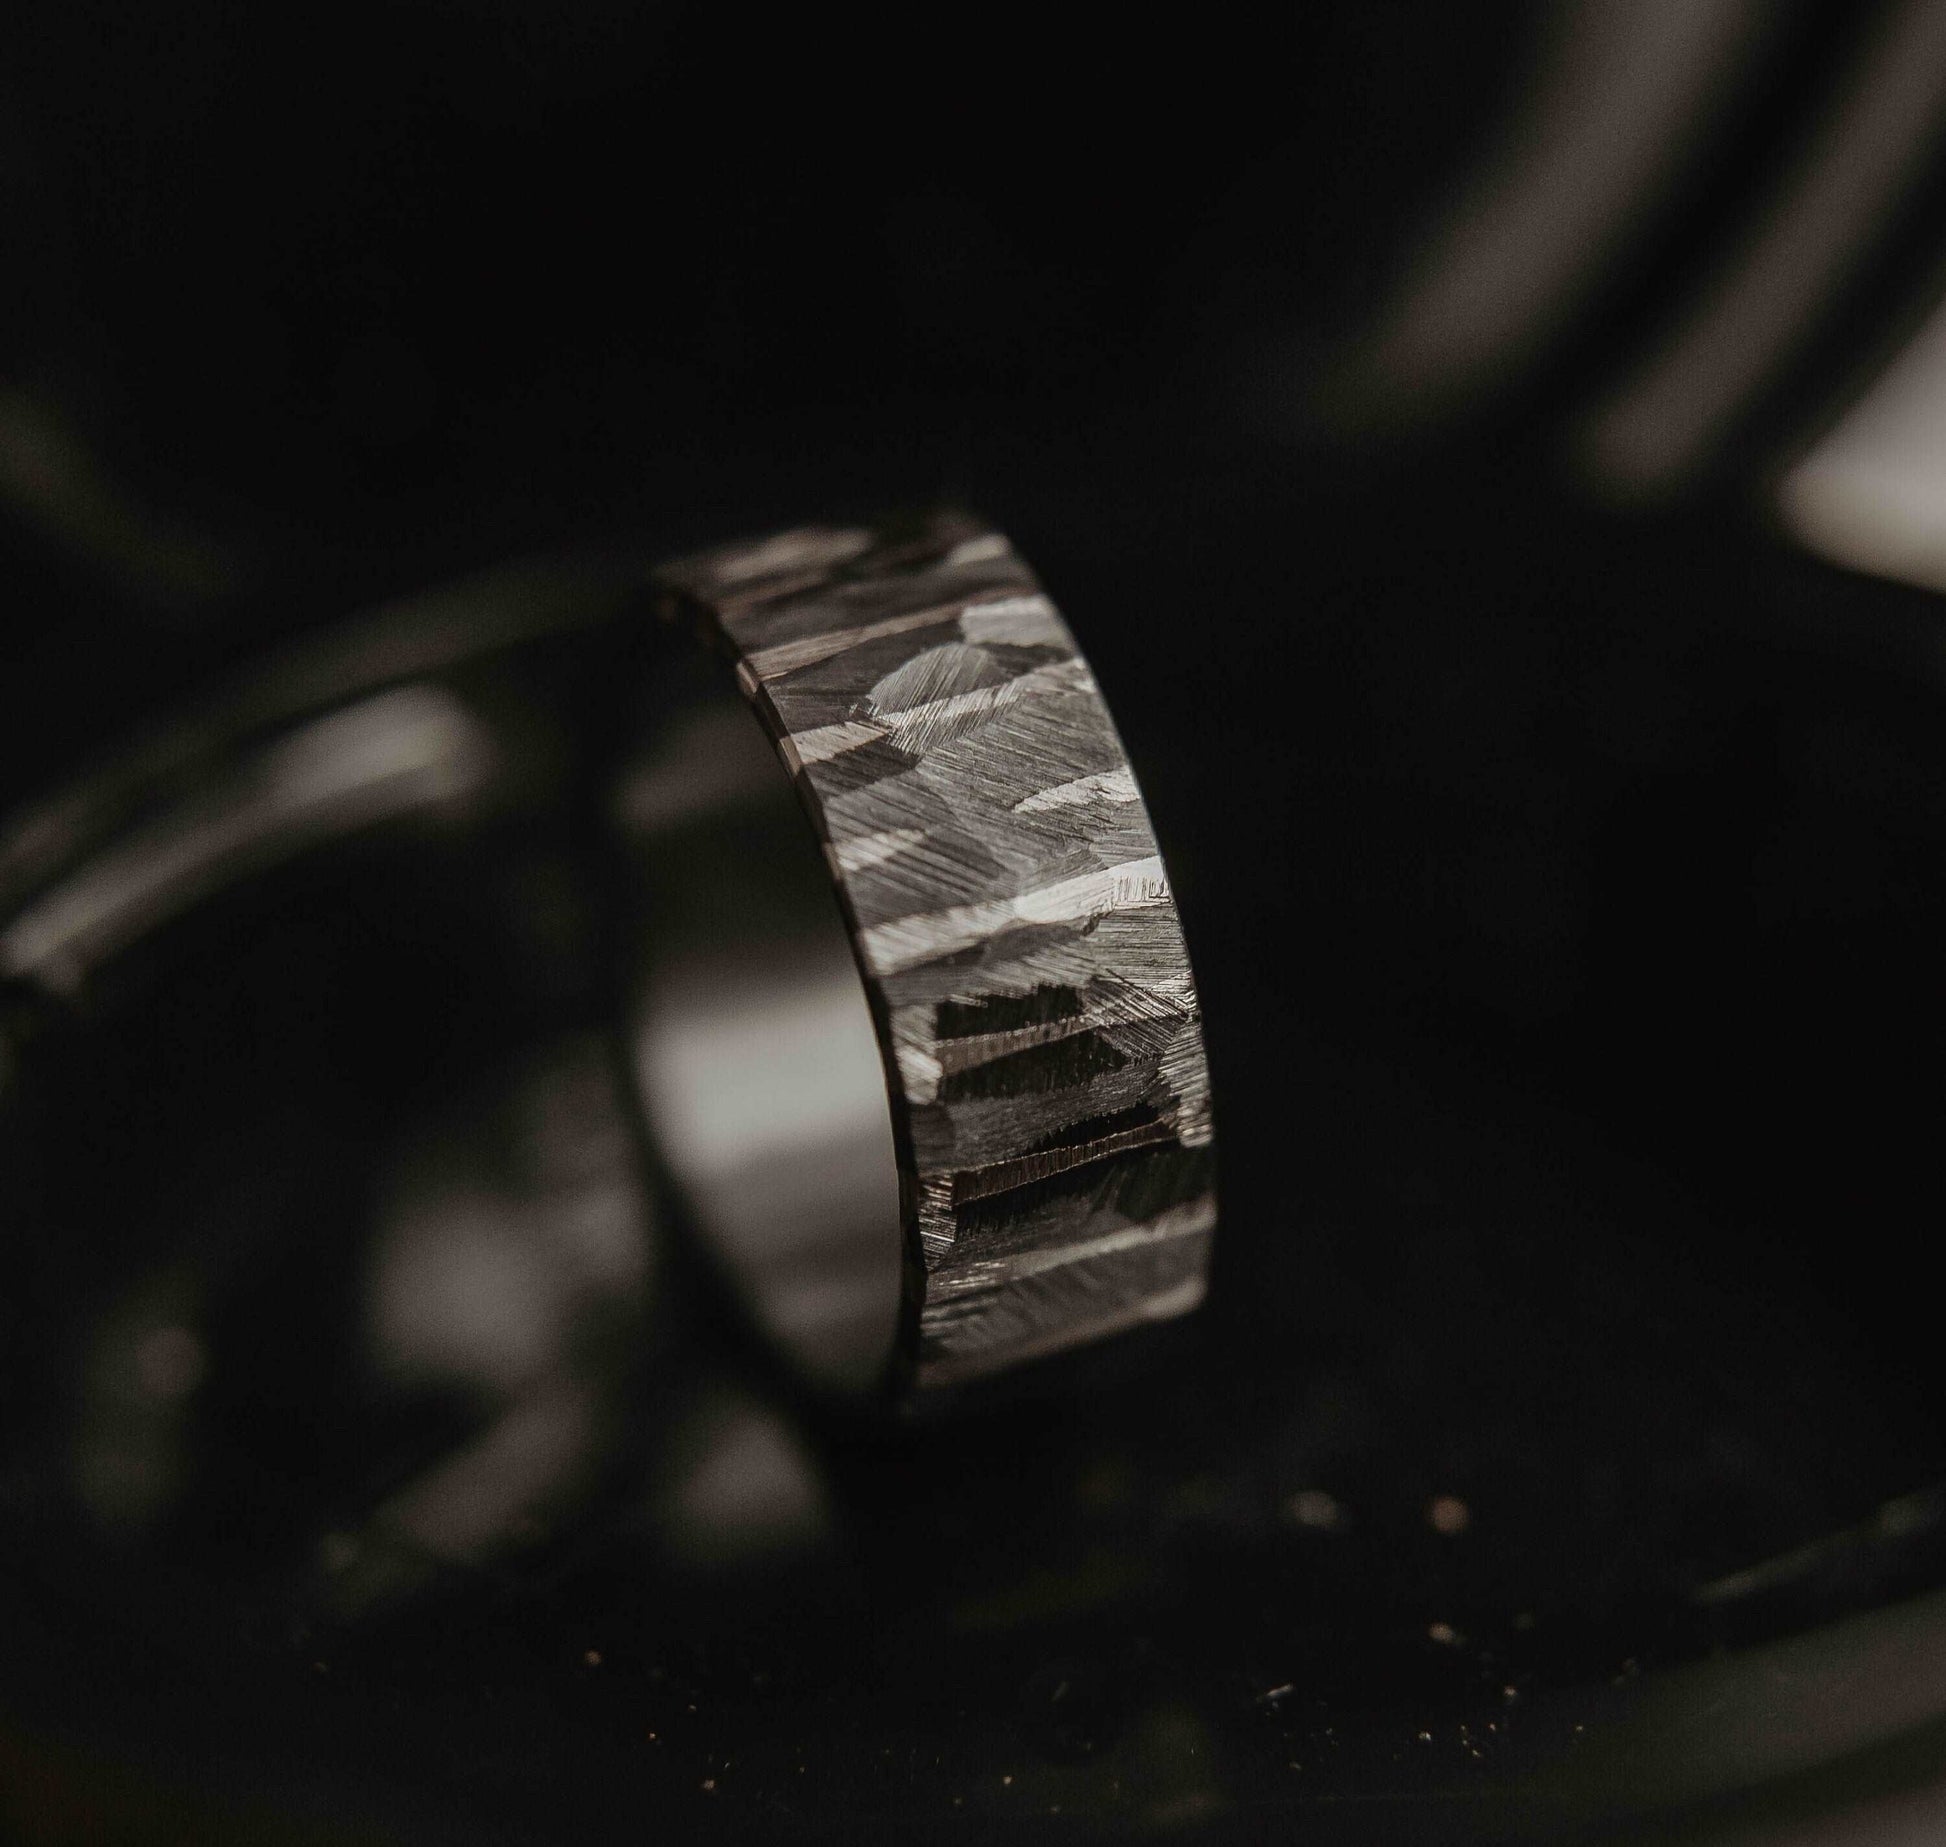 Moonlight Silver Wedding Band. This photo shows a roughly faceted zirconium wedding band with sterling silver stripes (Vertical with black background)